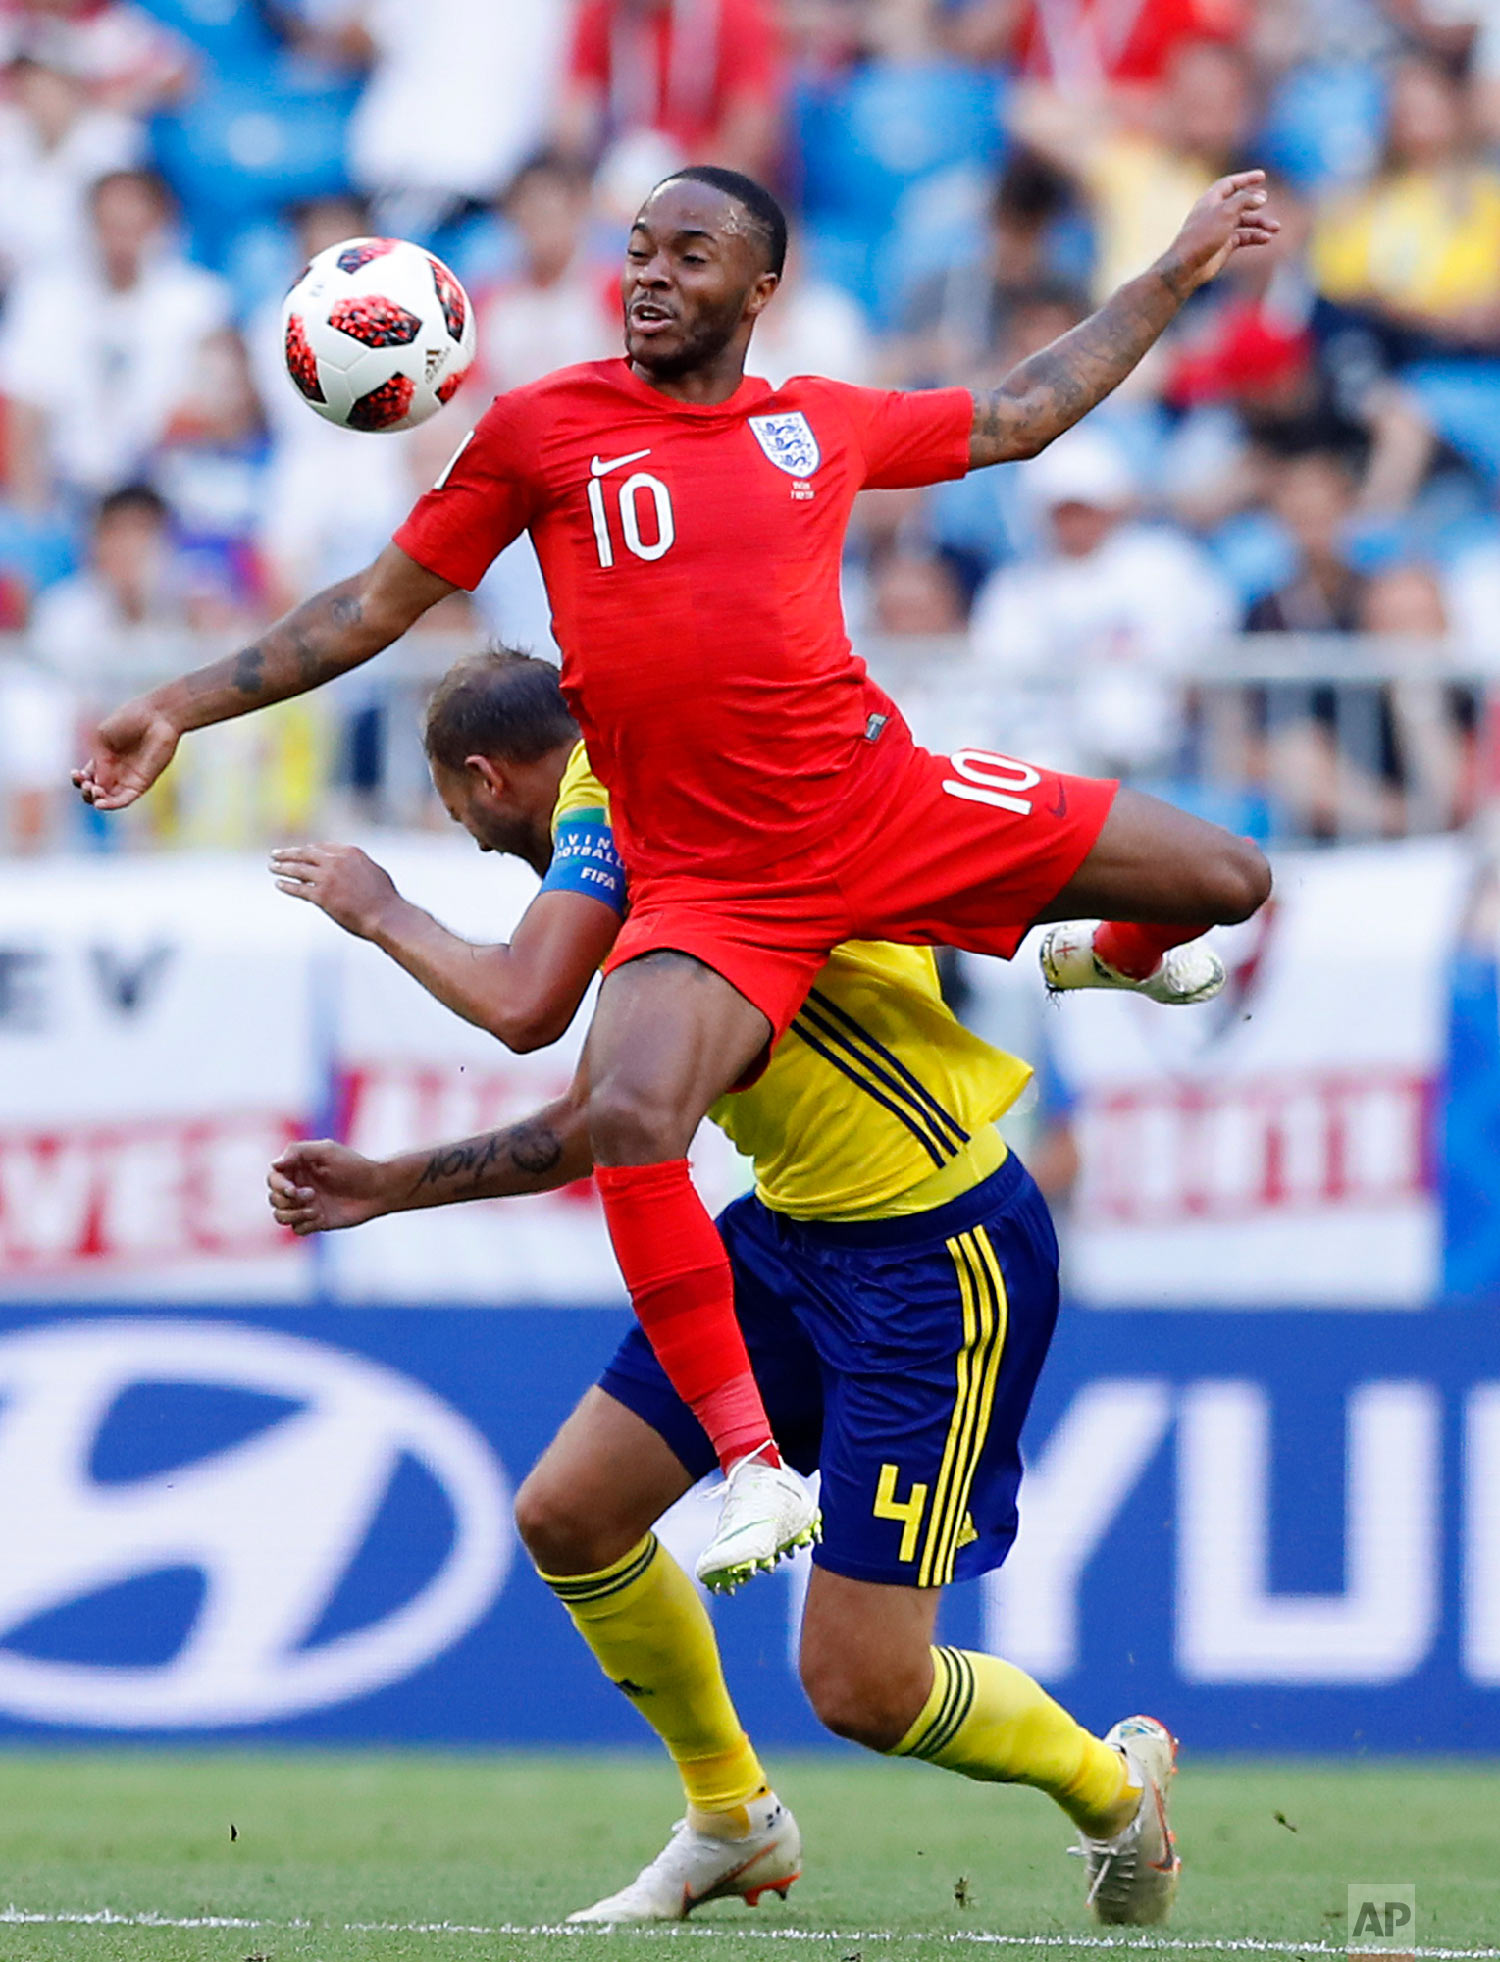  England's Raheem Sterling, top, challenges for the ball with Sweden's Andreas Granqvist during the quarterfinal match between Sweden and England at the 2018 soccer World Cup in the Samara Arena, in Samara, Russia, Saturday, July 7, 2018. (AP Photo/A